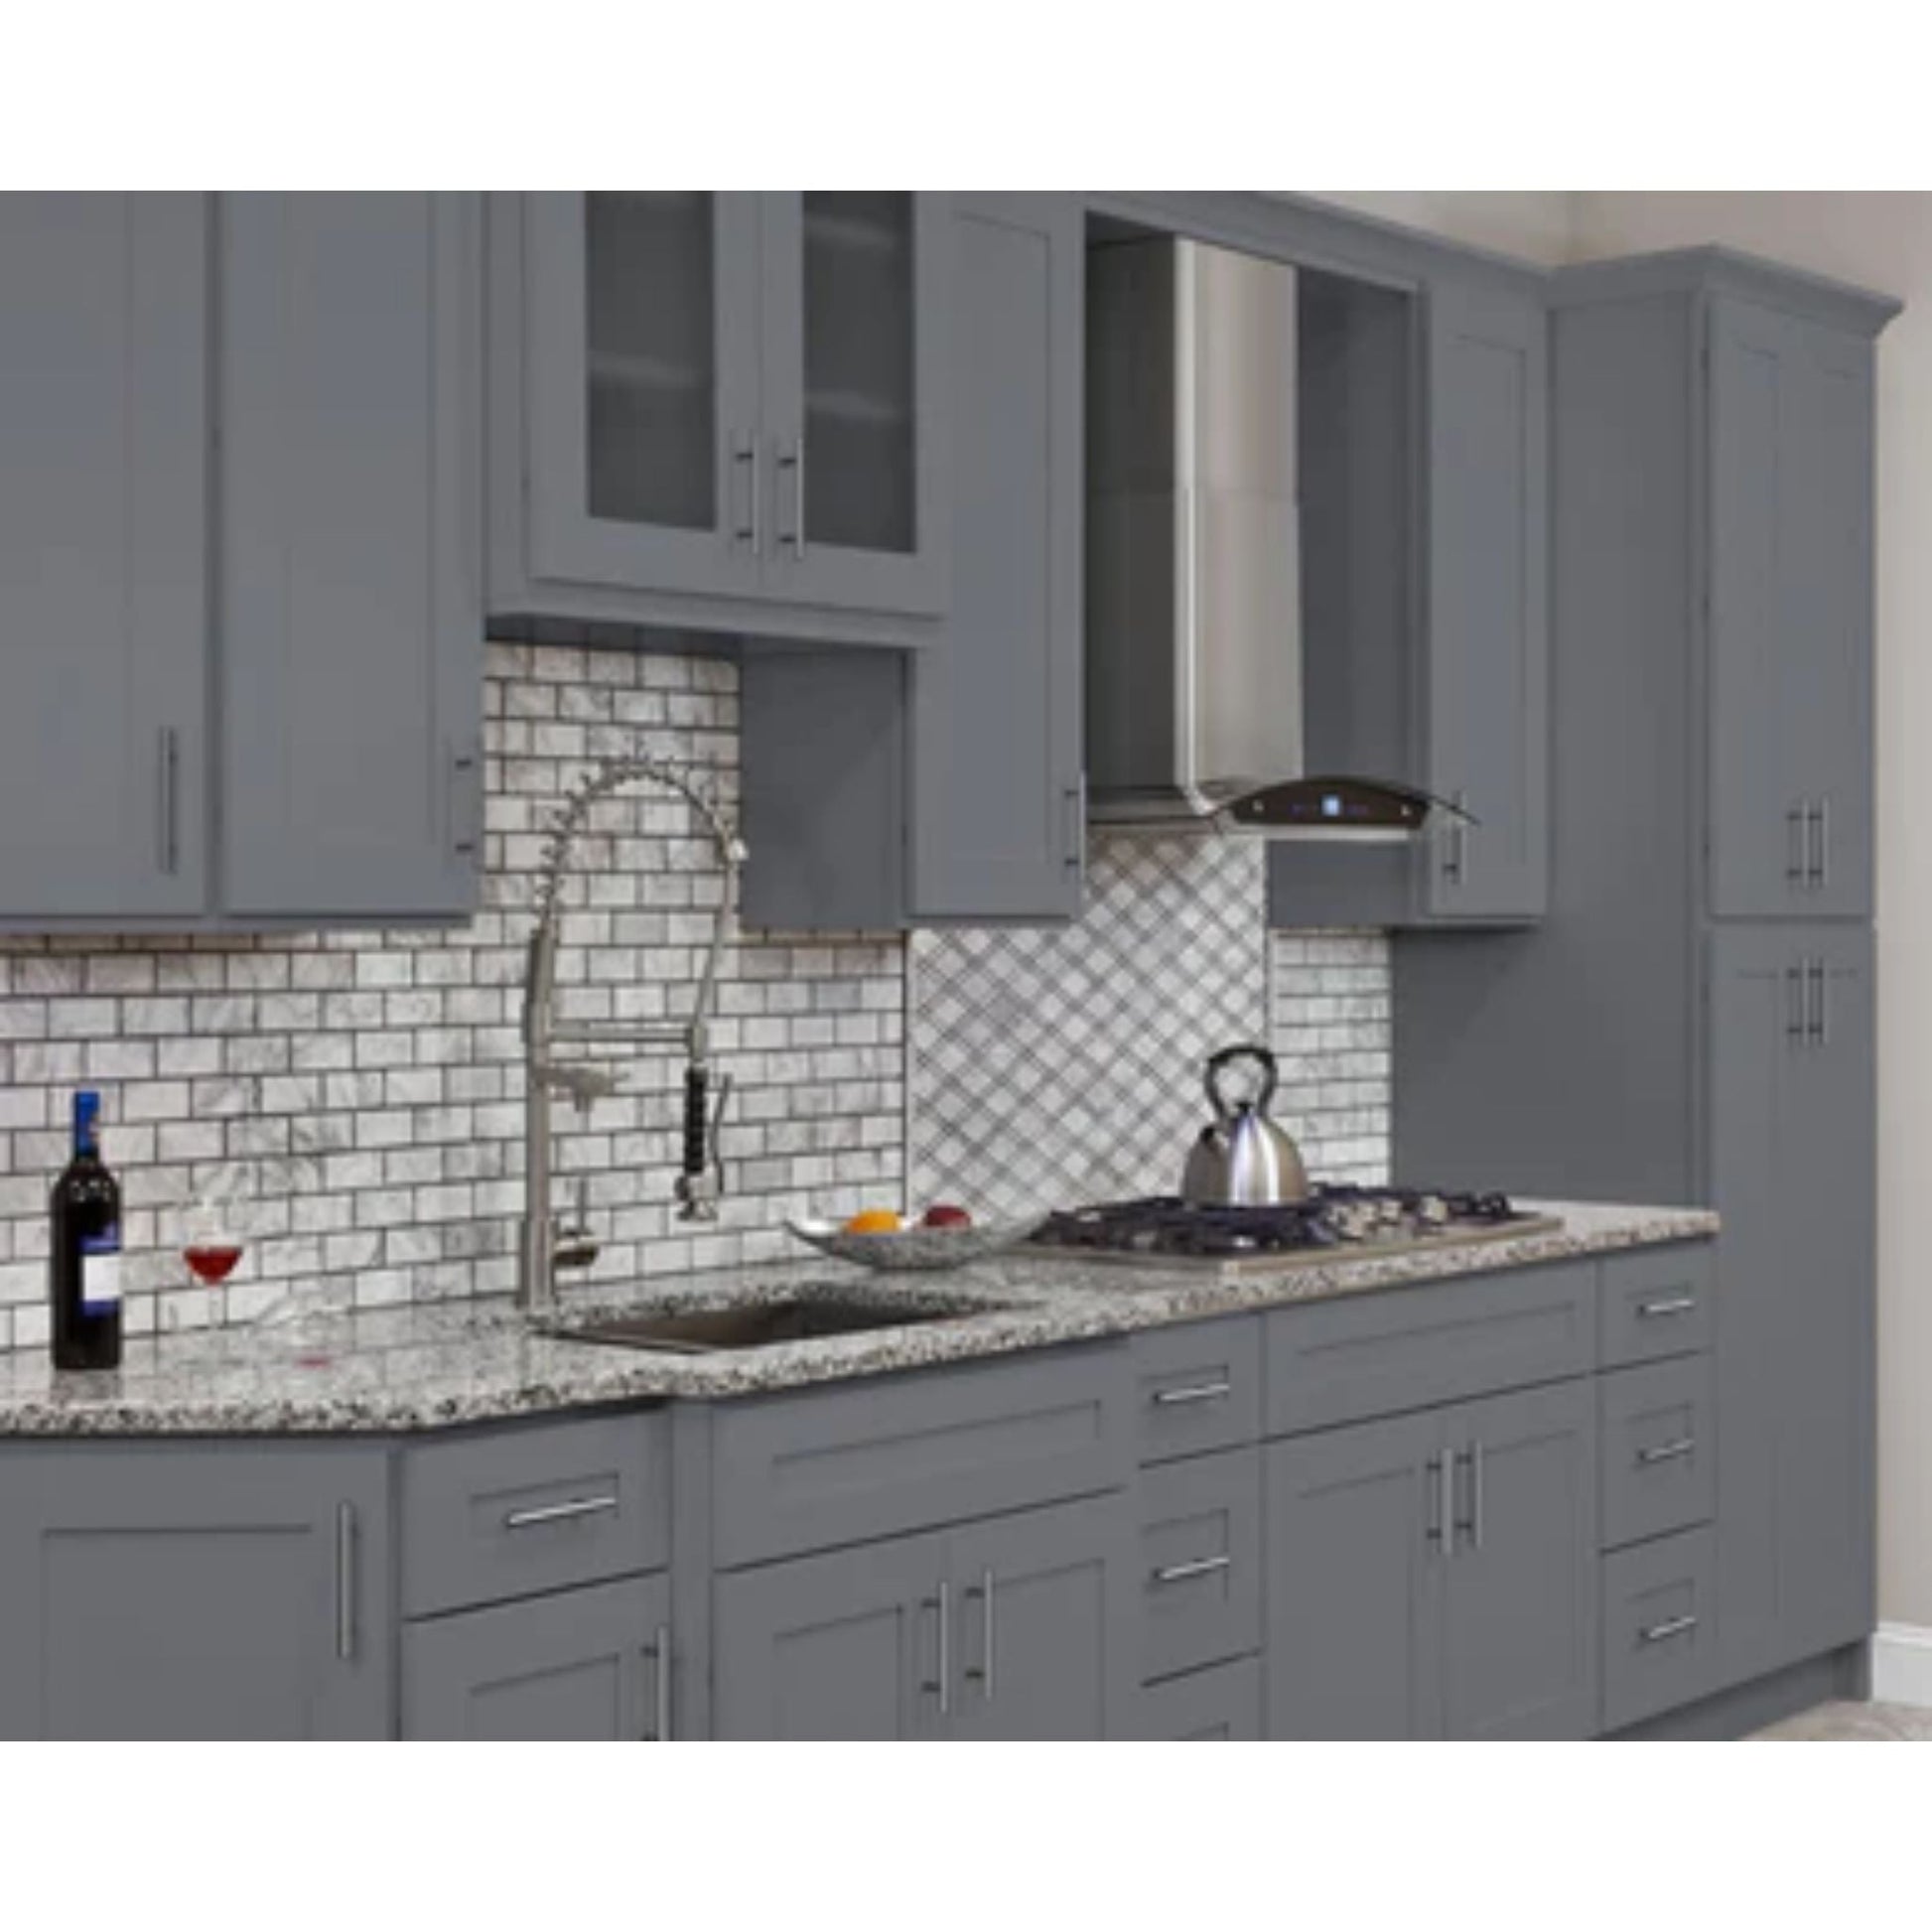 LessCare 24" x 42" x 12" Colonial Gray Wall Kitchen Cabinet - W2442